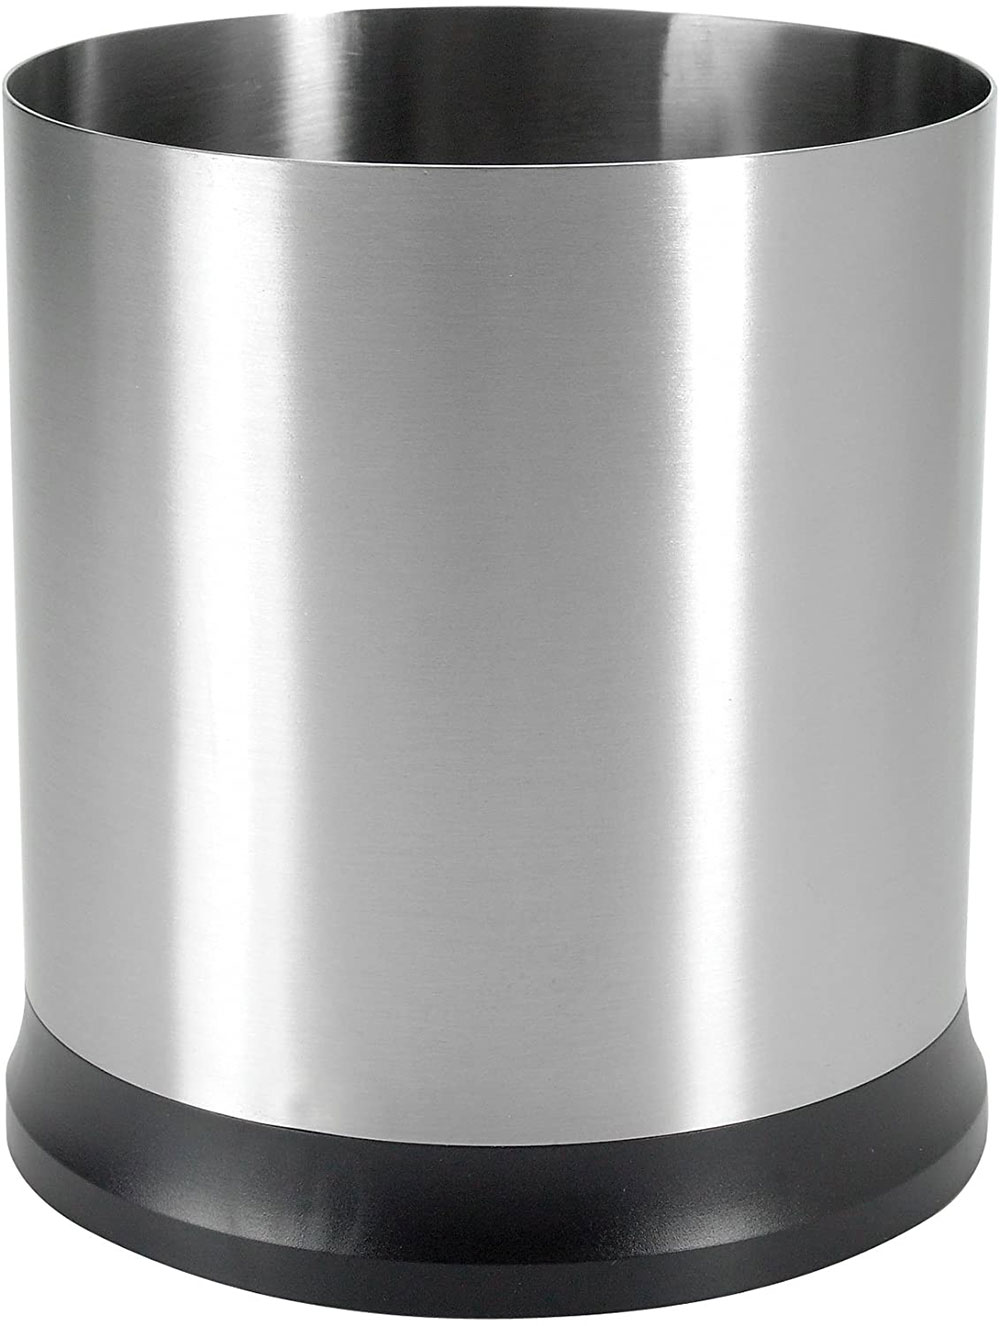 OXO-Good-Grips-Stainless-Steel-Rotating-Utensil-Holder What's the best kitchen utensil holder out there?